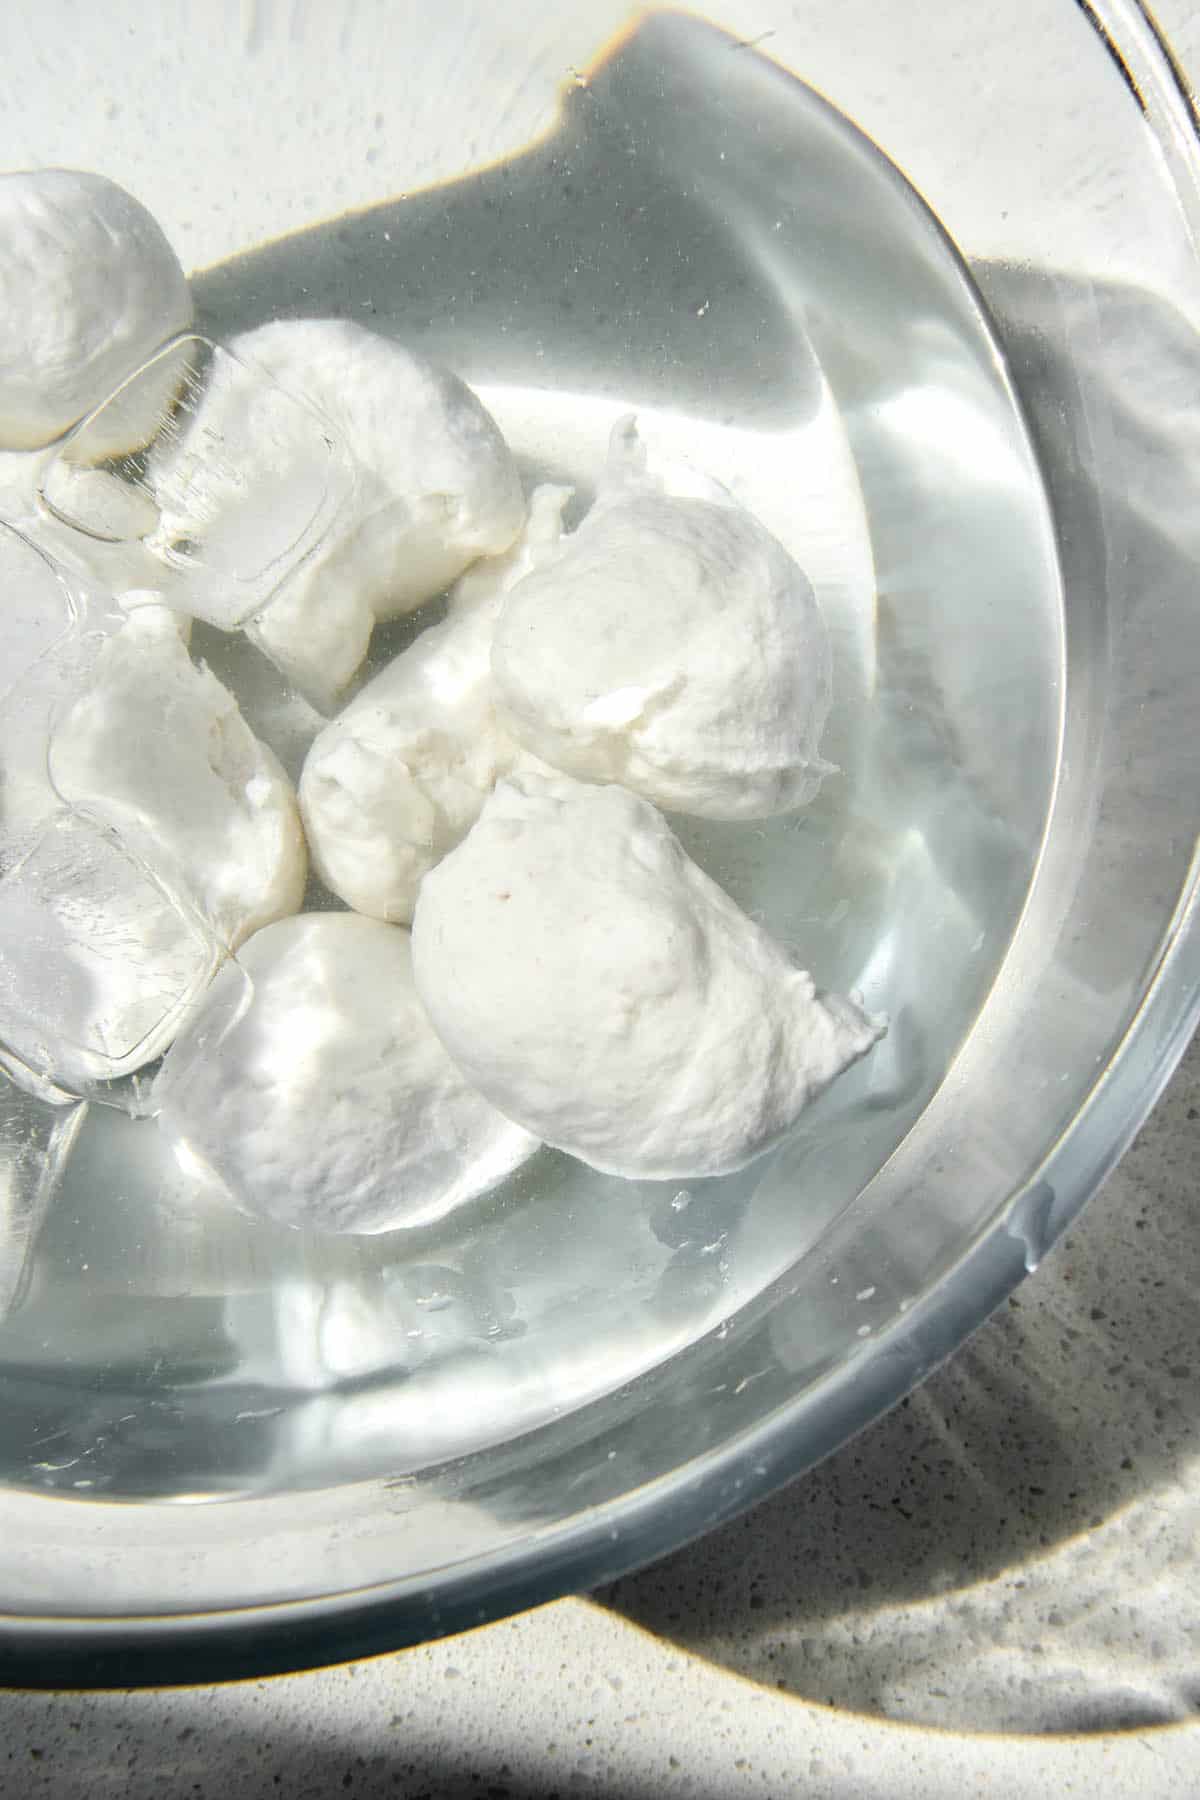 A close up aerial image of balls of vegan mozzarella in a bath of ice water. The bowl sits in the sunlight on a white speckled stone bench